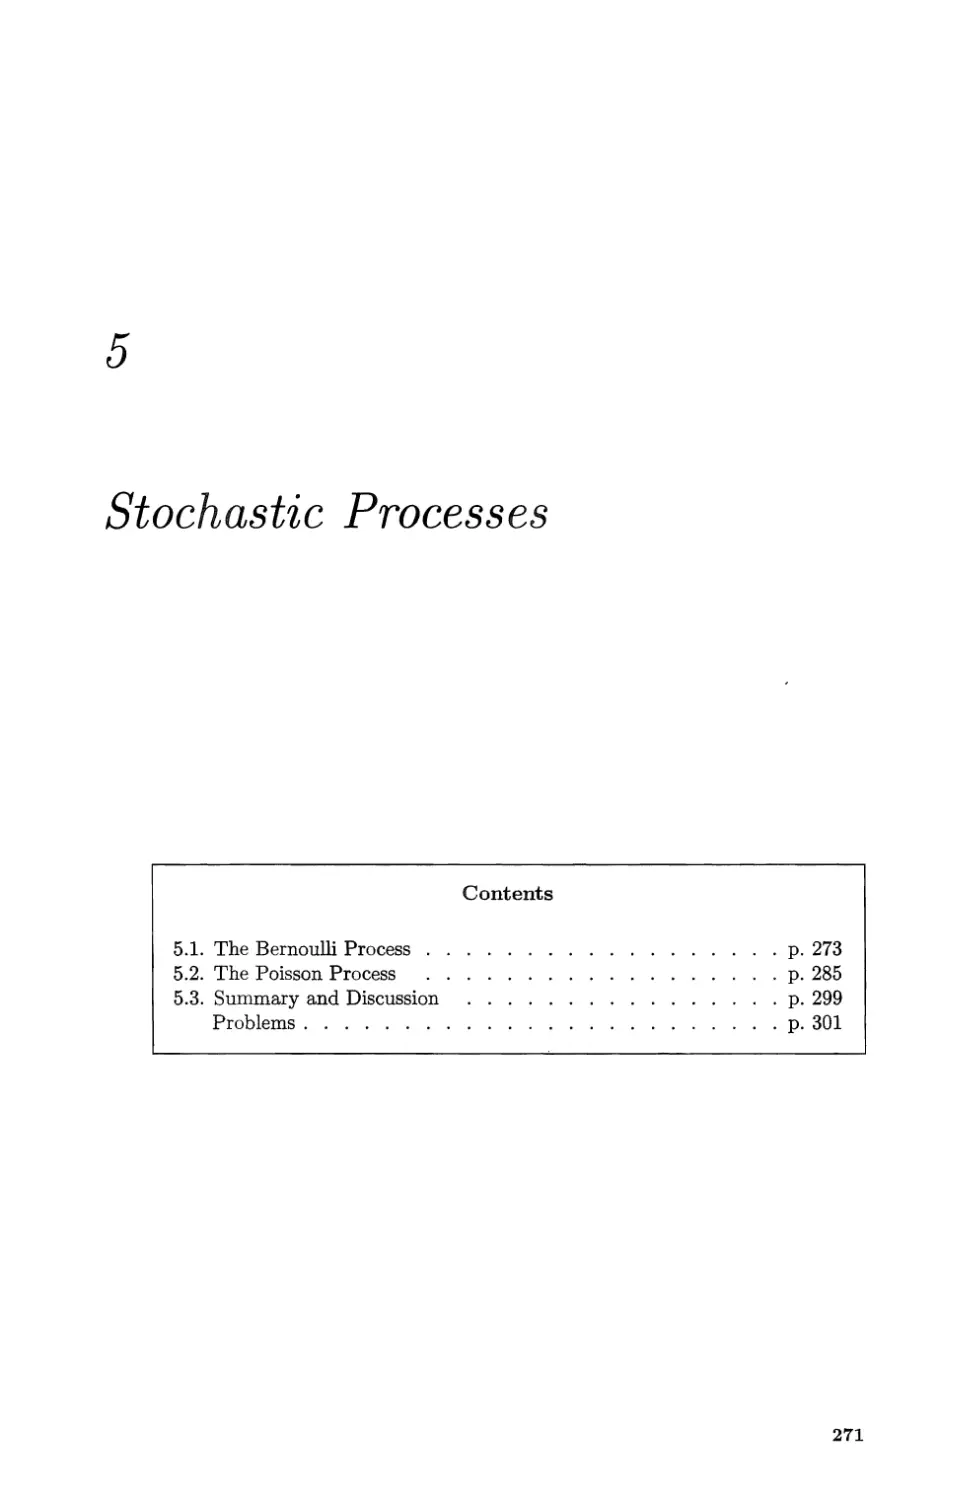 Chapter 5-Stochastic Processes